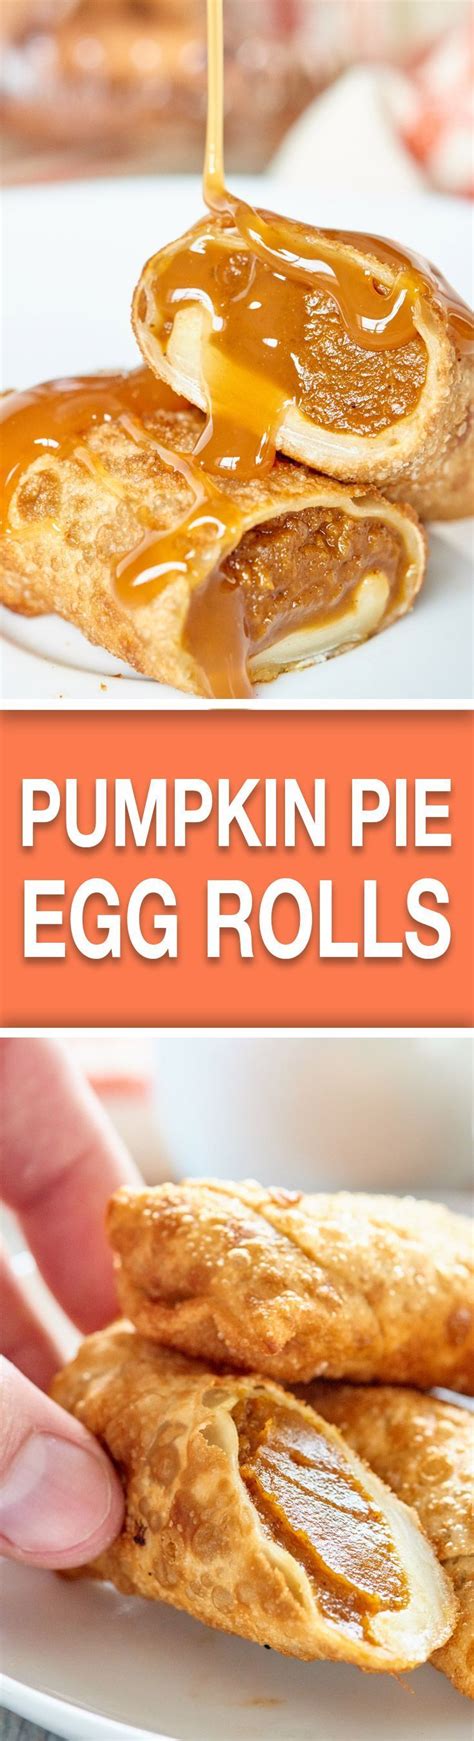 Anyone can enjoy these recipes, even those without allergies to eggs. Pumpkin Pie Egg Rolls | Recipe | Pumpkin recipes, Food ...